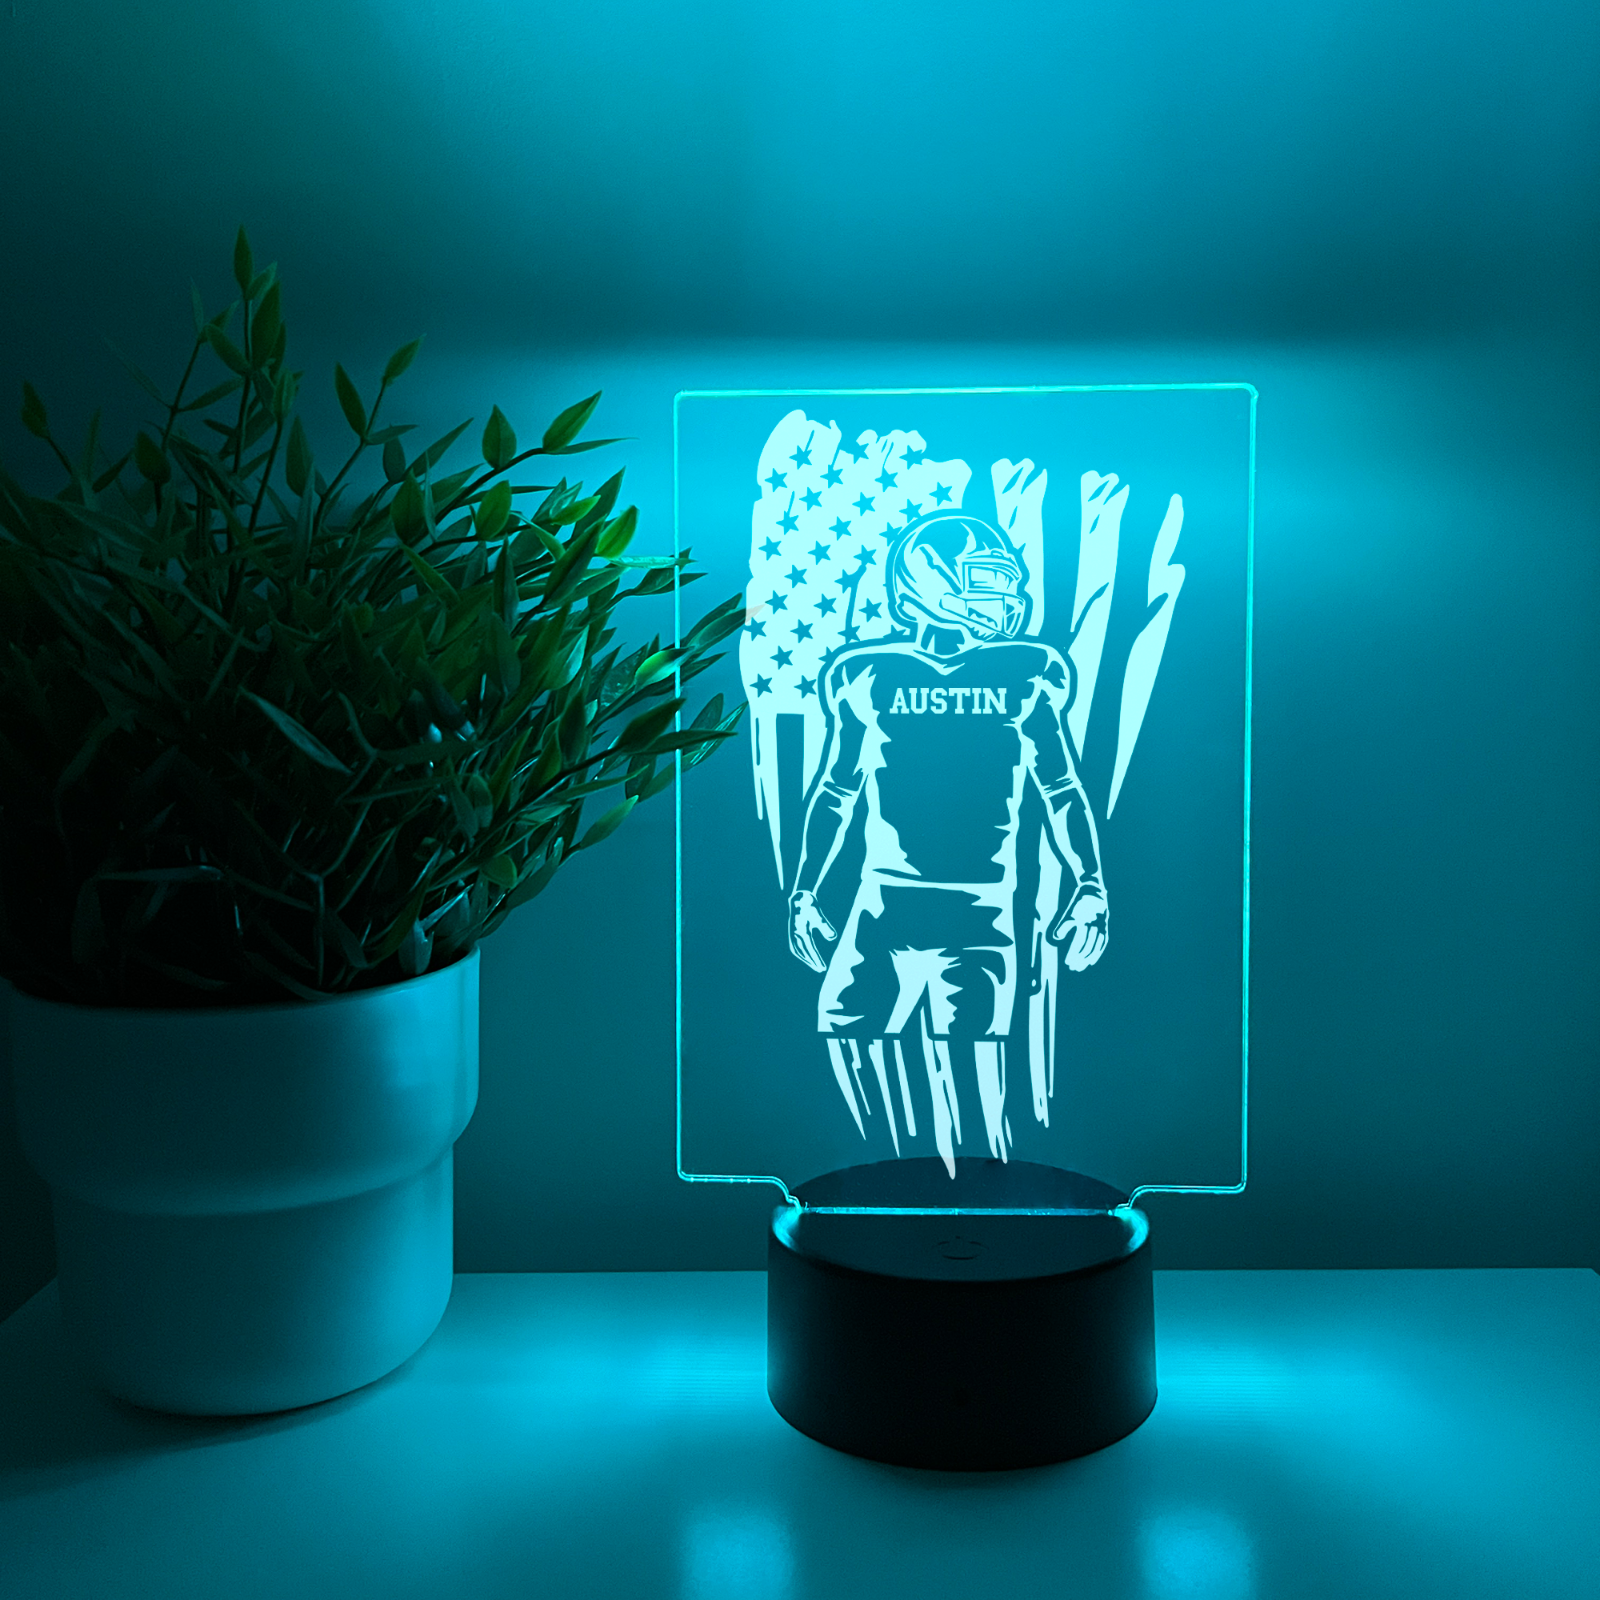 Personalized RGB Light Up Desk Lamp Stand Football Athlete Warner Gift